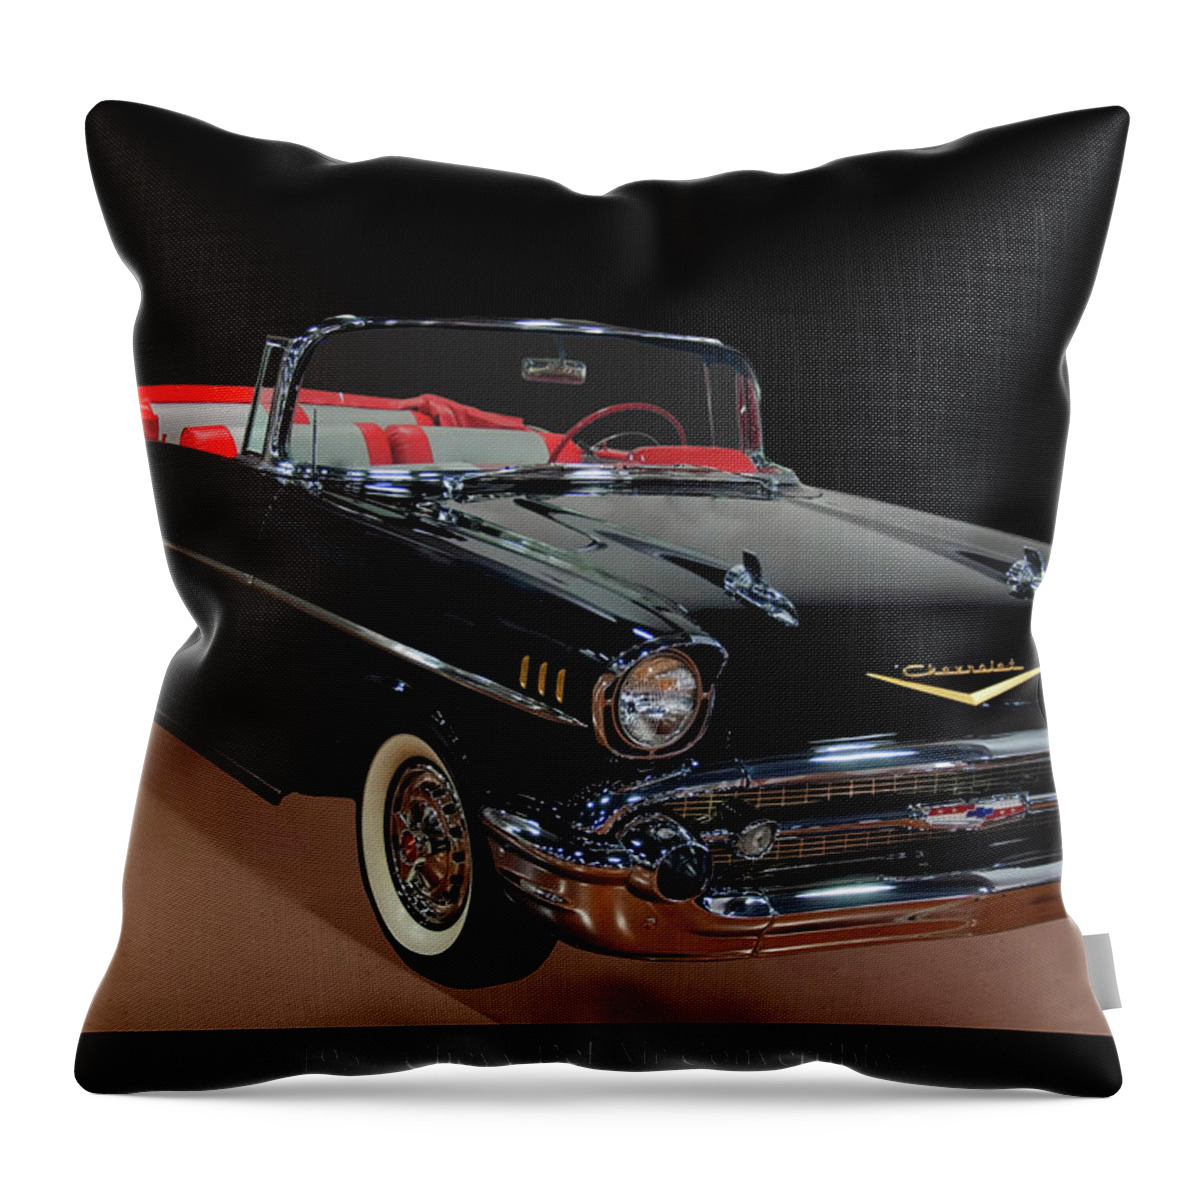 1950s Cars Throw Pillow featuring the photograph 1957 Chevy Bel Air Convertible by Flees Photos